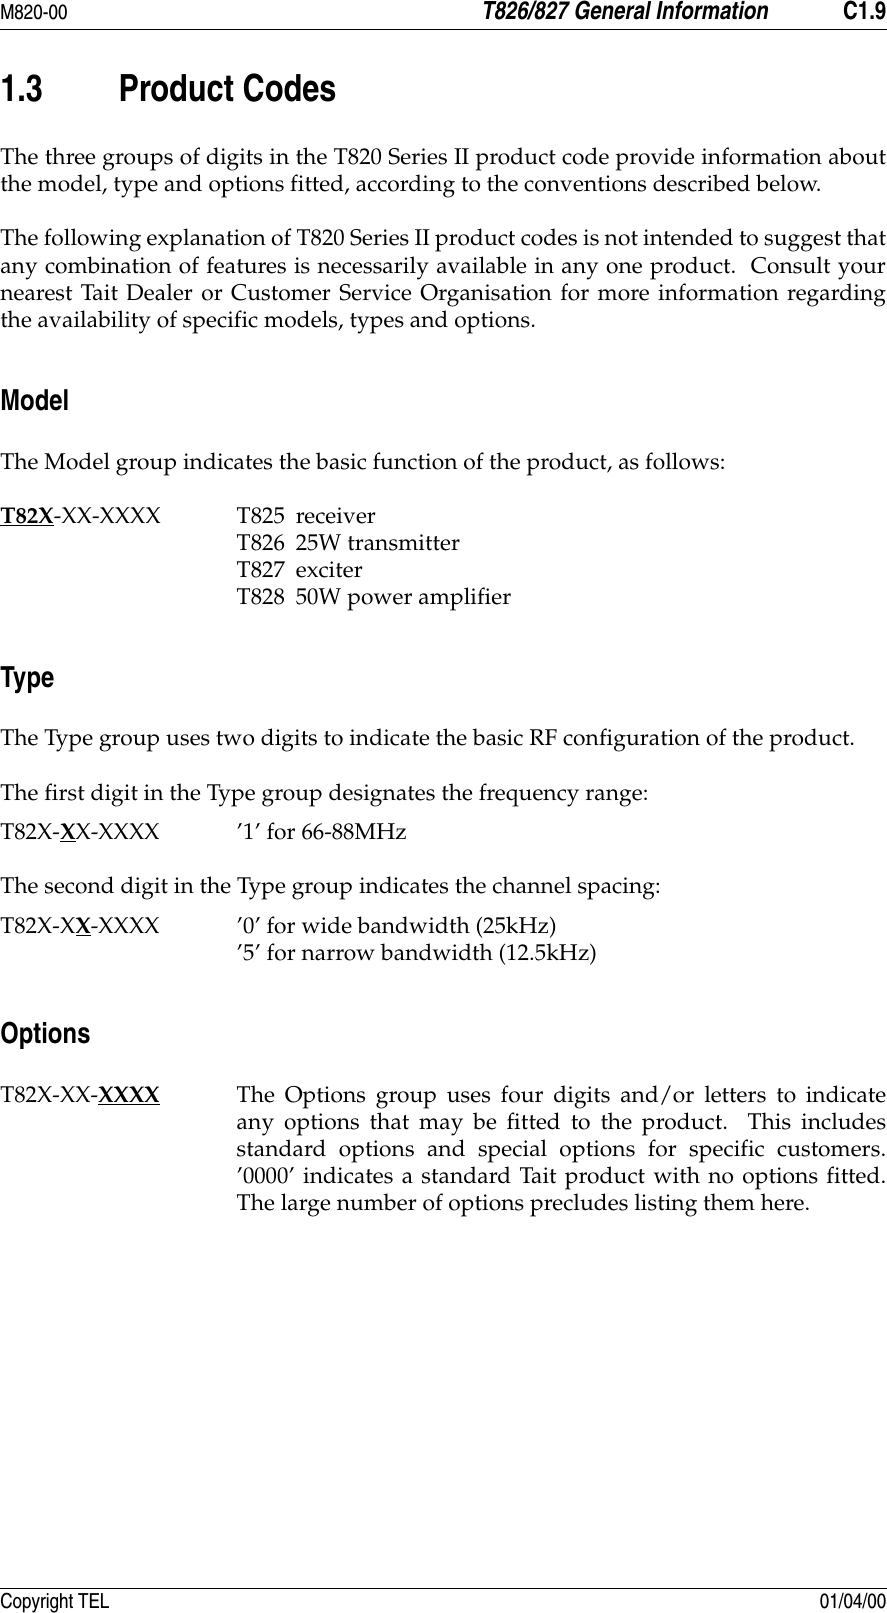 M820-00 T826/827 General Information C1.9Copyright TEL 01/04/001.3 Product CodesThe three groups of digits in the T820 Series II product code provide information aboutthe model, type and options fitted, according to the conventions described below.The following explanation of T820 Series II product codes is not intended to suggest thatany combination of features is necessarily available in any one product.  Consult yournearest Tait Dealer or Customer Service Organisation for more information regardingthe availability of specific models, types and options.ModelThe Model group indicates the basic function of the product, as follows:T82X-XX-XXXX T825 receiverT826 25W transmitterT827 exciterT828 50W power amplifierTypeThe Type group uses two digits to indicate the basic RF configuration of the product.The first digit in the Type group designates the frequency range:T82X-XX-XXXX ’1’ for 66-88MHzThe second digit in the Type group indicates the channel spacing:T82X-XX-XXXX ’0’ for wide bandwidth (25kHz)’5’ for narrow bandwidth (12.5kHz)OptionsT82X-XX-XXXX The Options group uses four digits and/or letters to indicateany options that may be fitted to the product.  This includesstandard options and special options for specific customers.’0000’ indicates a standard Tait product with no options fitted.The large number of options precludes listing them here.